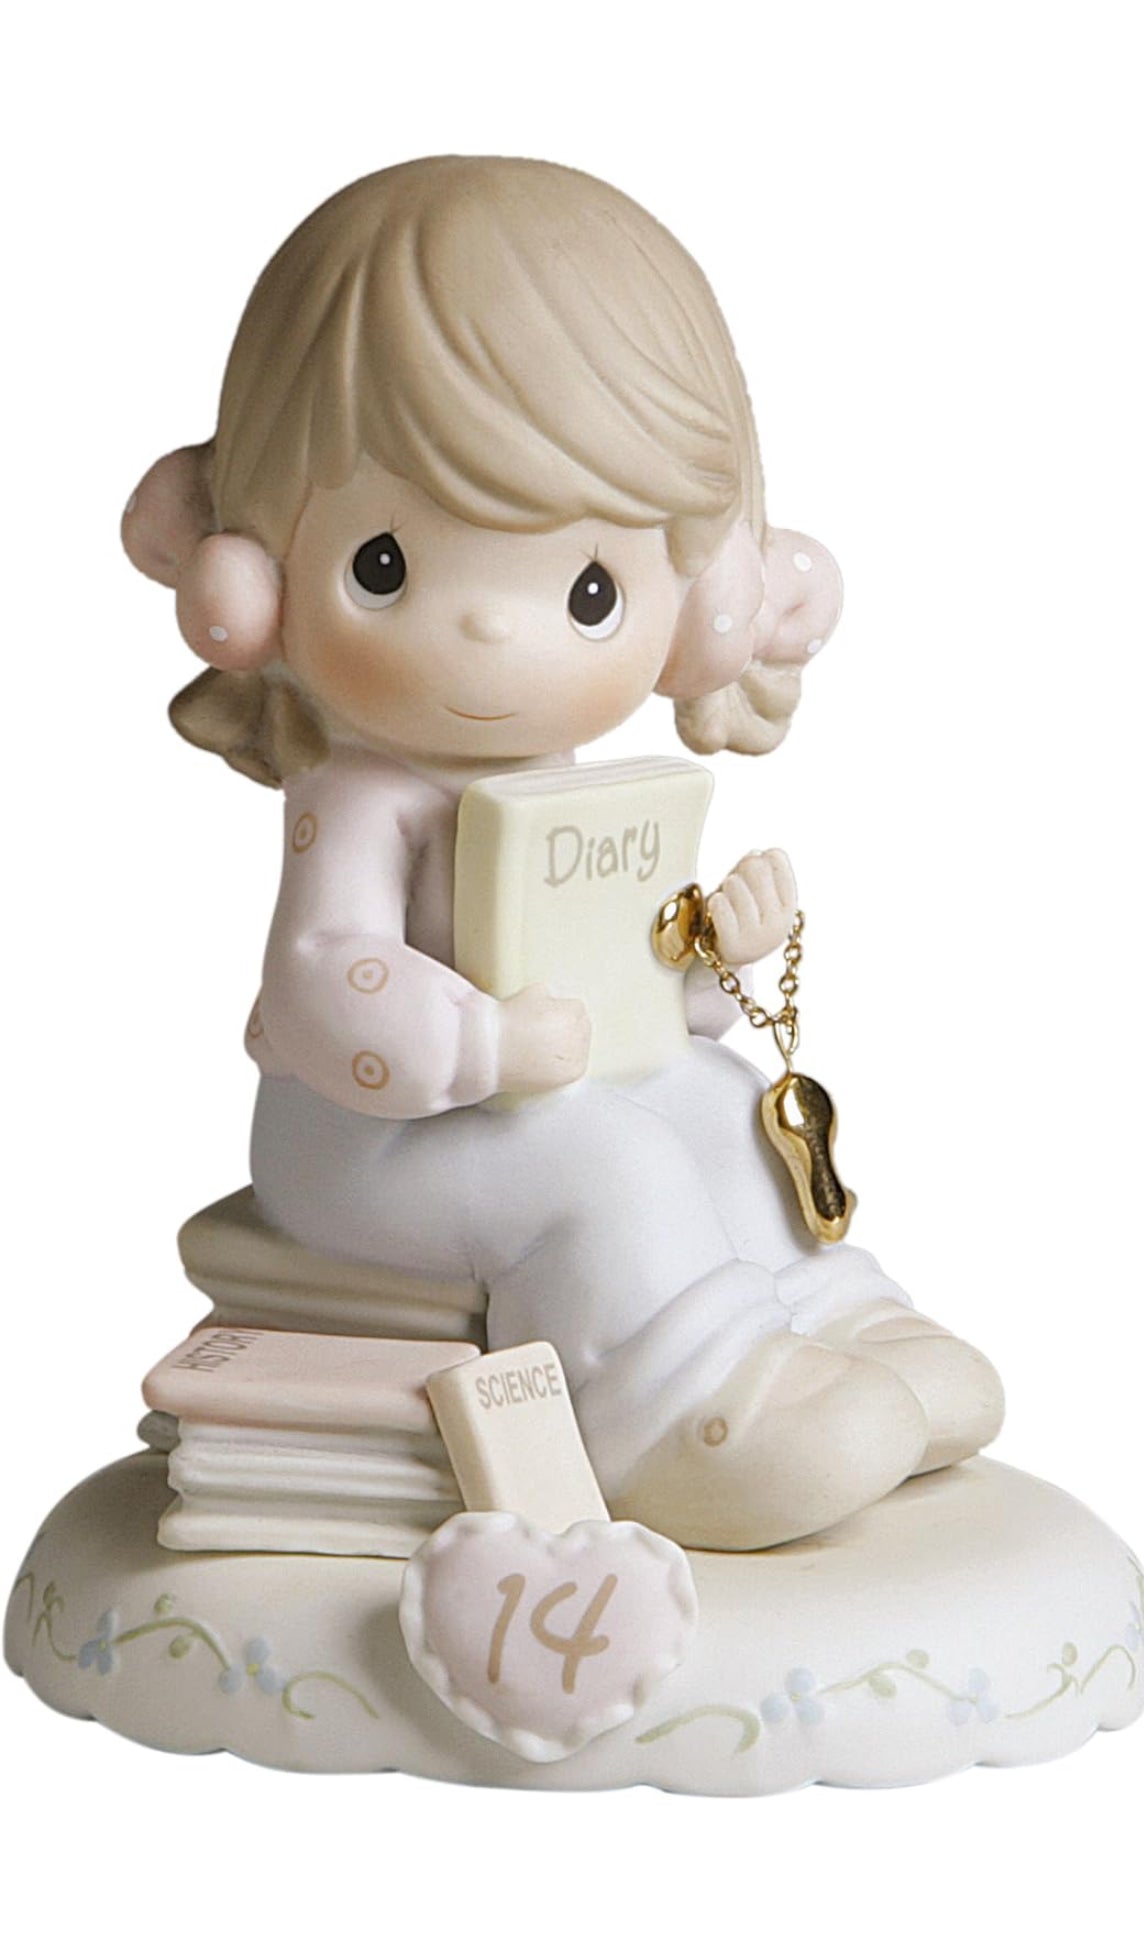 Growing in Grace Age 14 - Precious Moment Figurine 272655